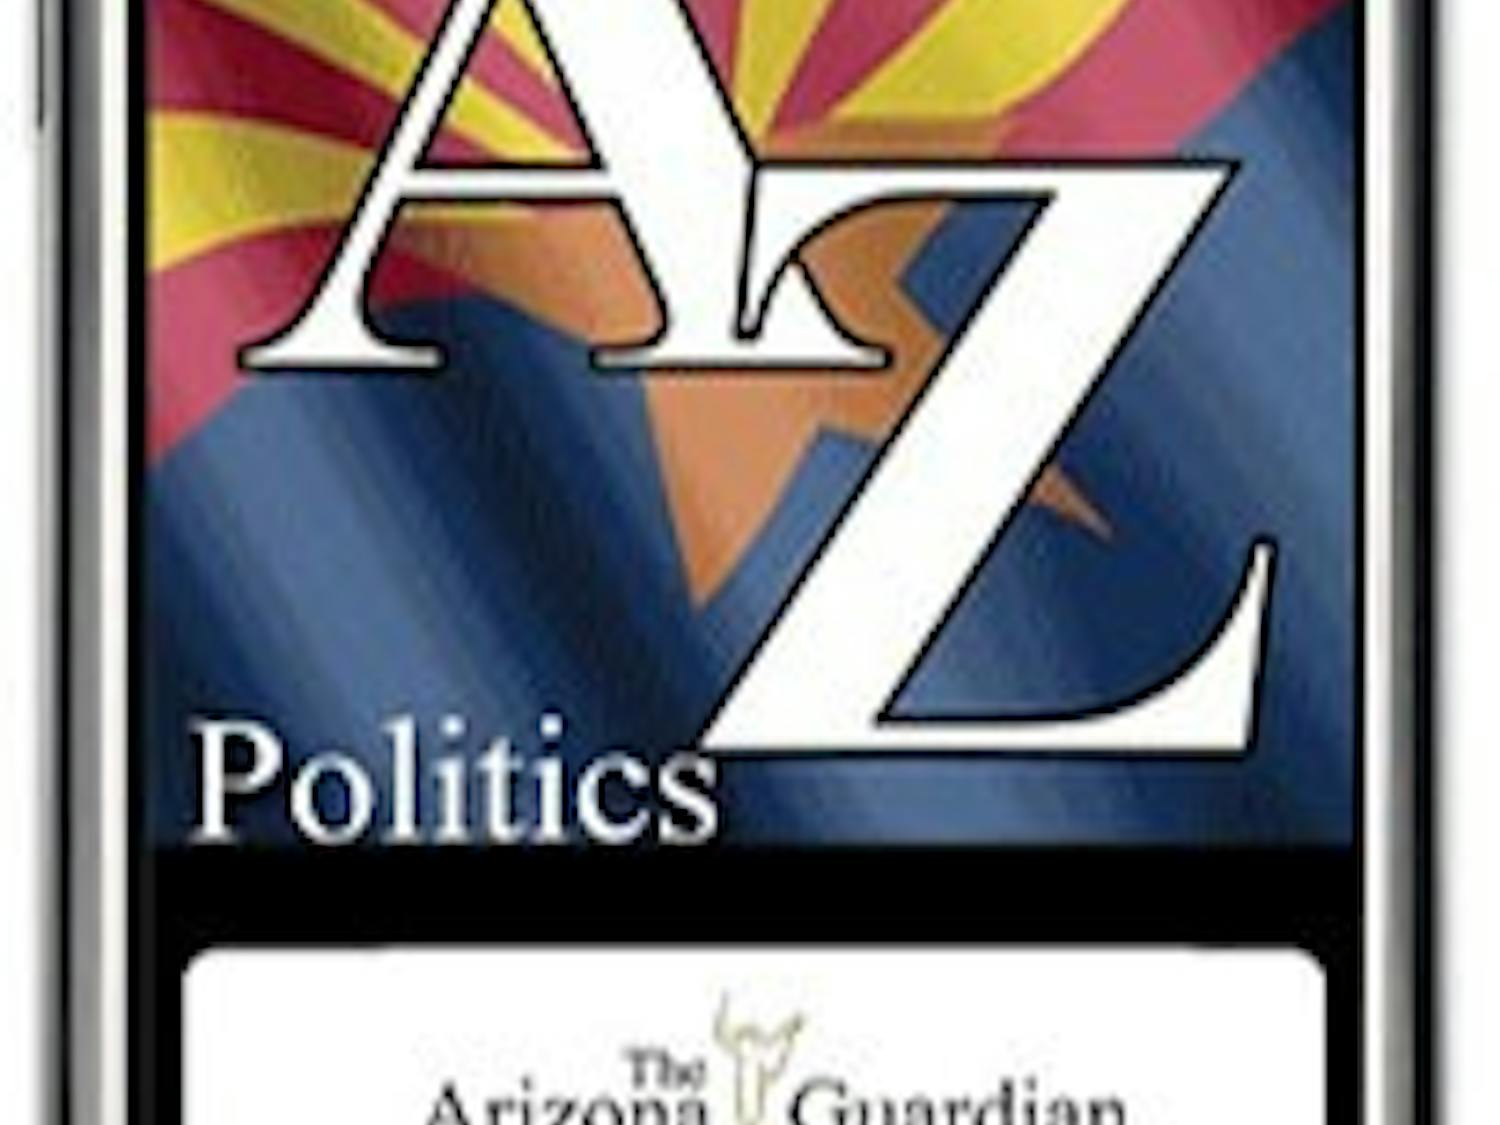 iPHONE: The Arizona Guardian and the Cronkite School will be releasing an Arizona political directory iPhone application. (Photo Courtesy of The Arizona Guardian)